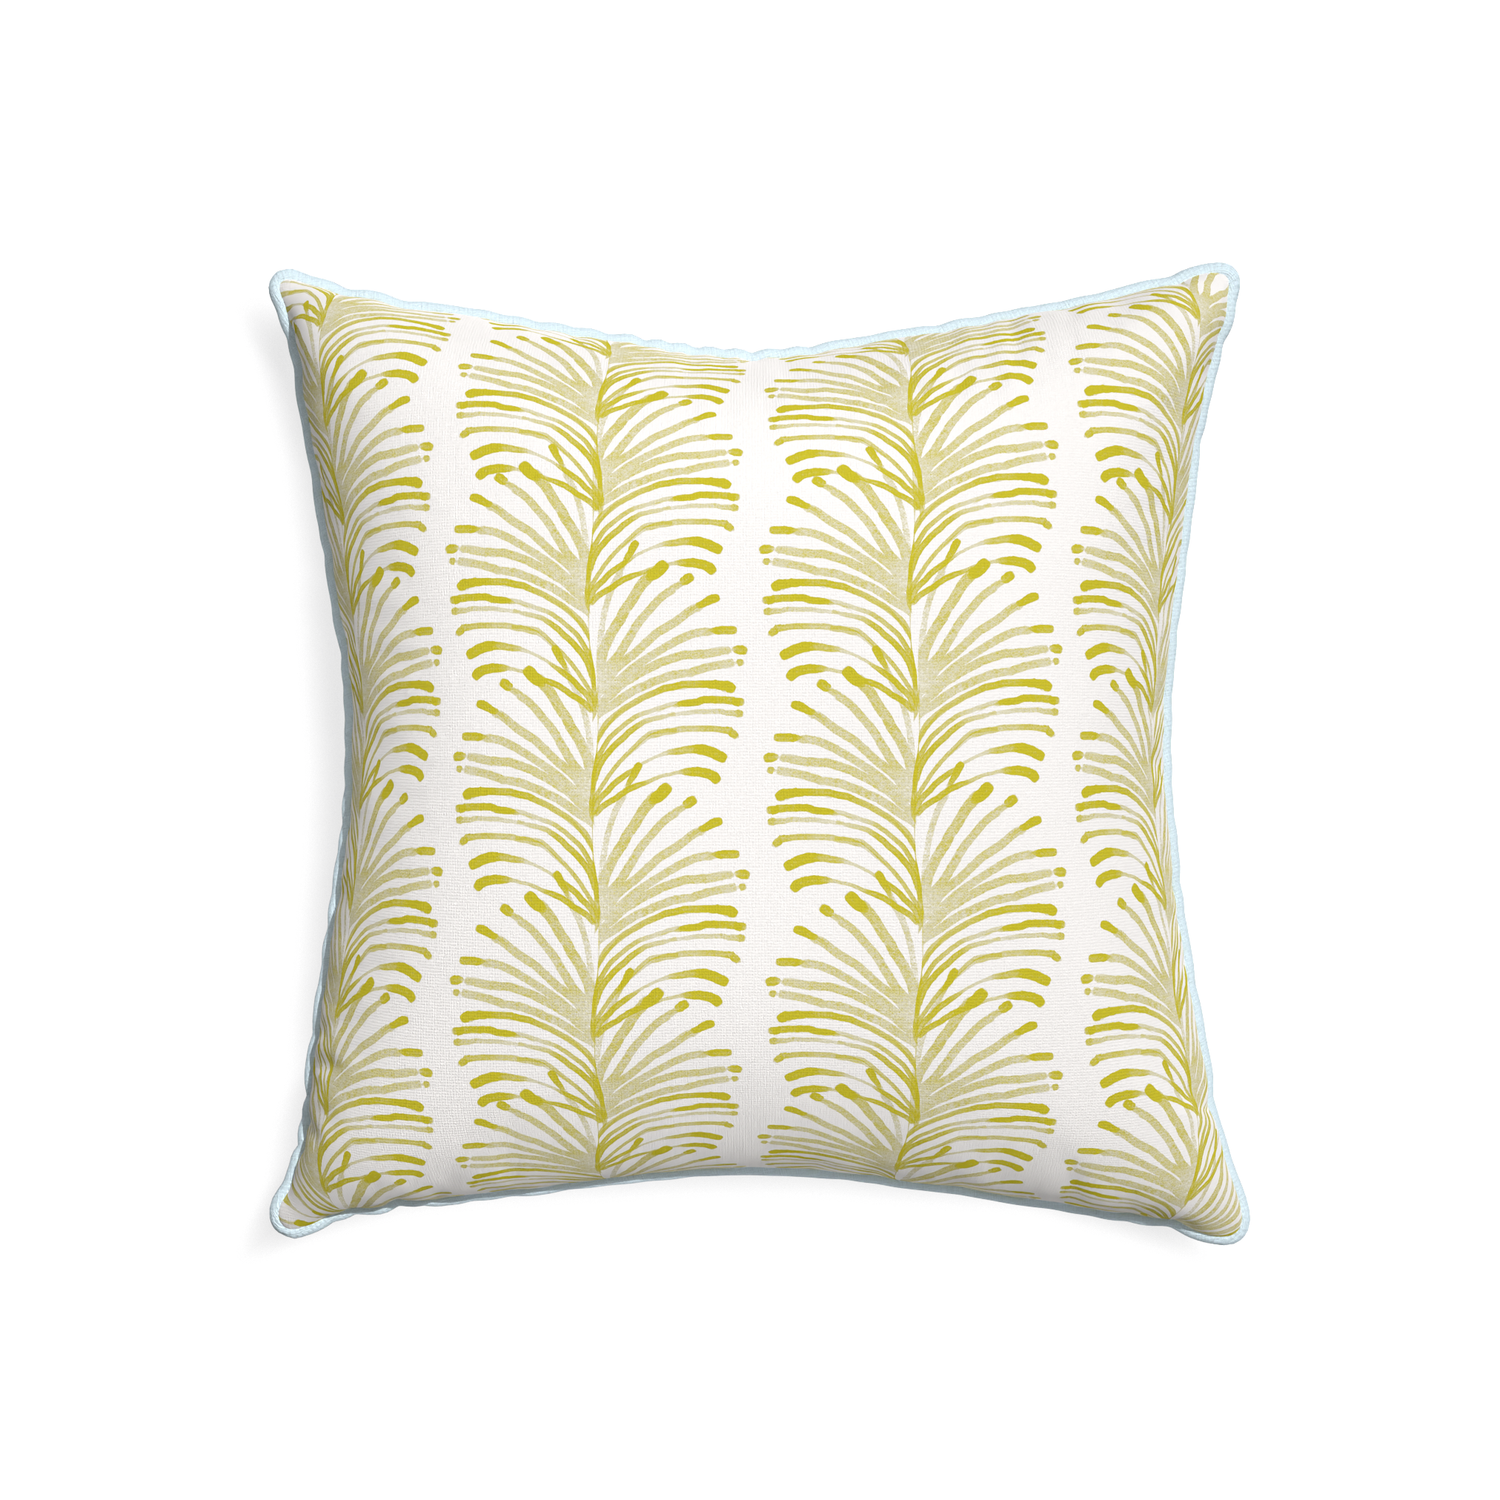 22-square emma chartreuse custom yellow stripe chartreusepillow with powder piping on white background